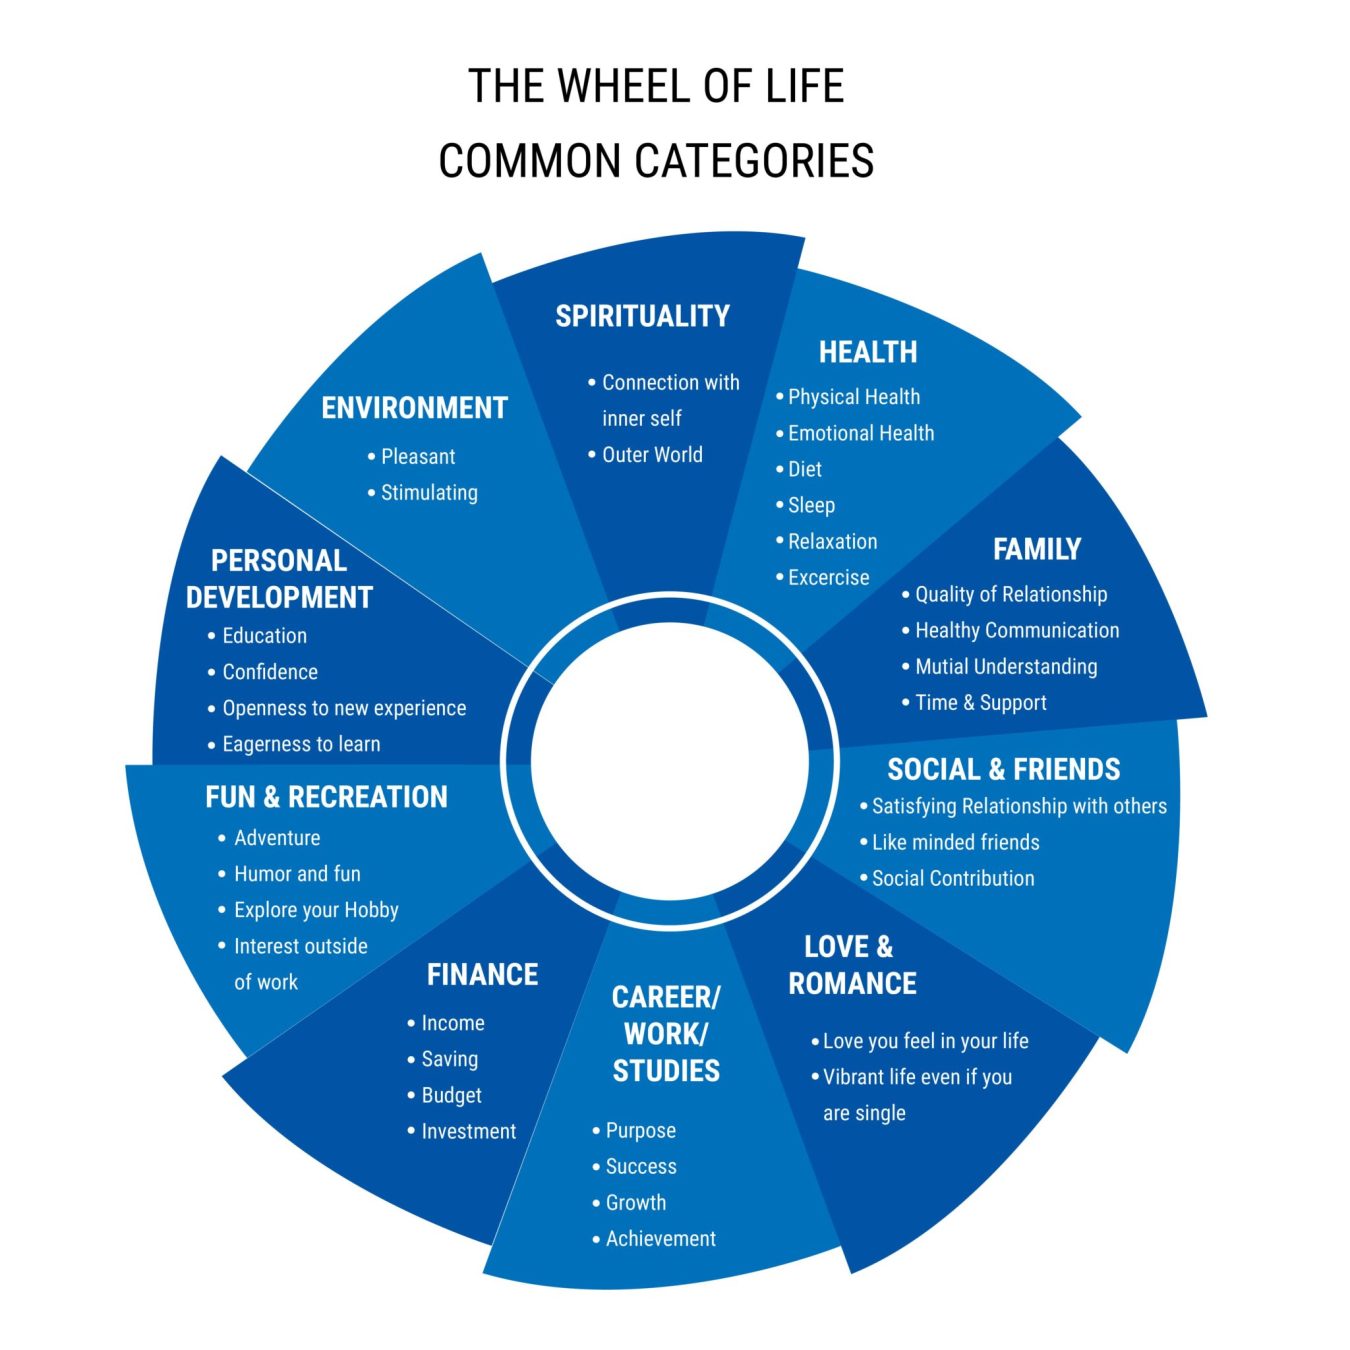 THE WHEEL OF LIFE COMMON CATEGORIES